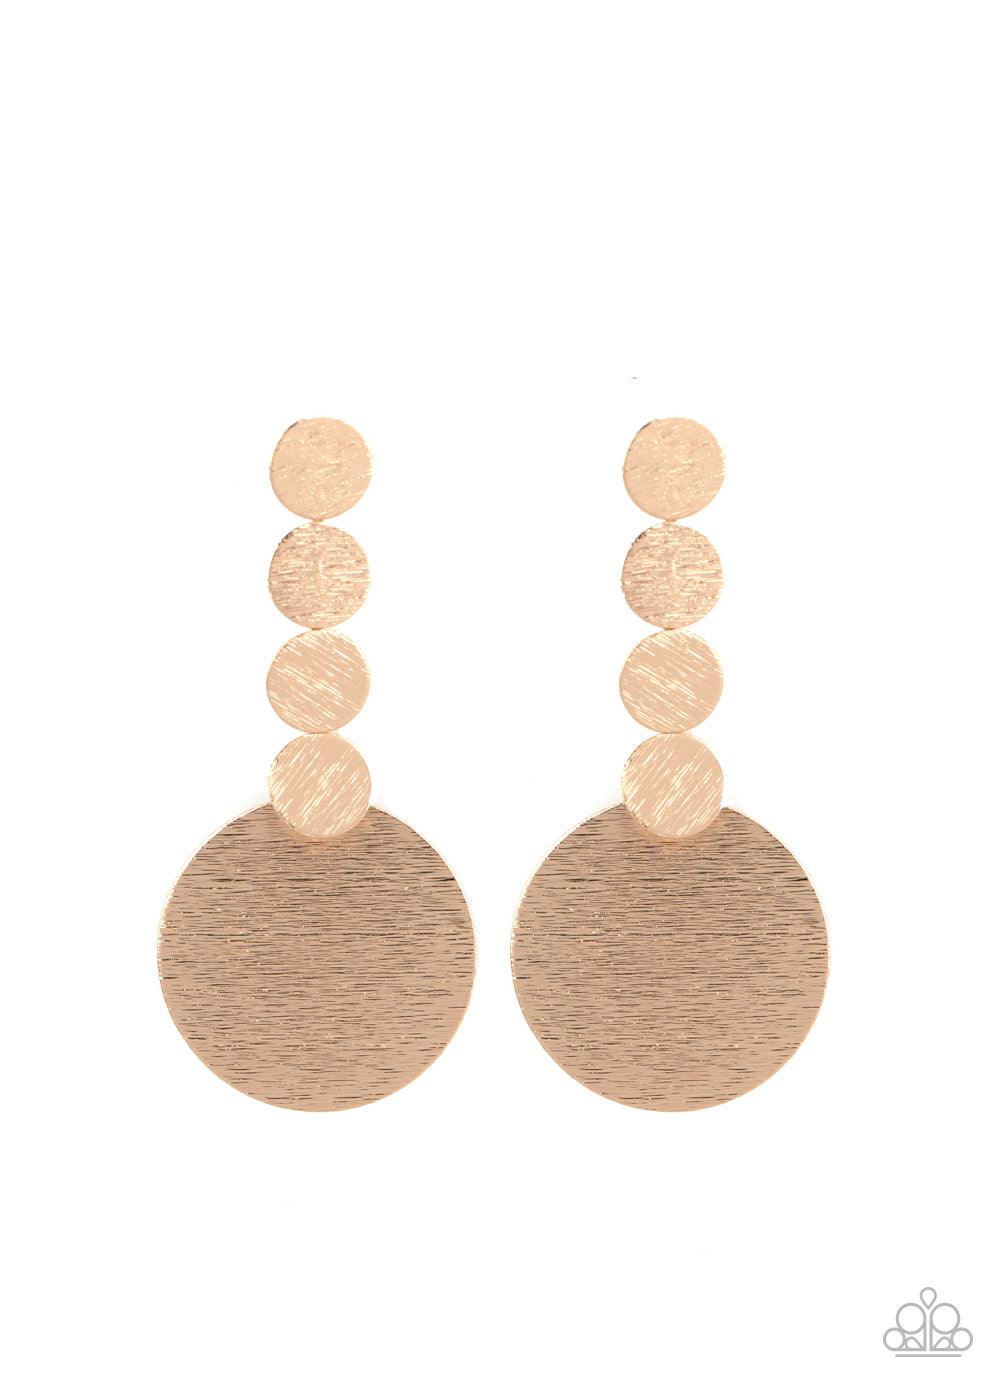 Paparazzi Accessories Idolized Illumination - Gold Featuring a delicately scratched surface, a row of dainty gold discs connects to a large gold disc, creating a bold display. Earring attaches to a standard post fitting. Sold as one pair of post earrings.